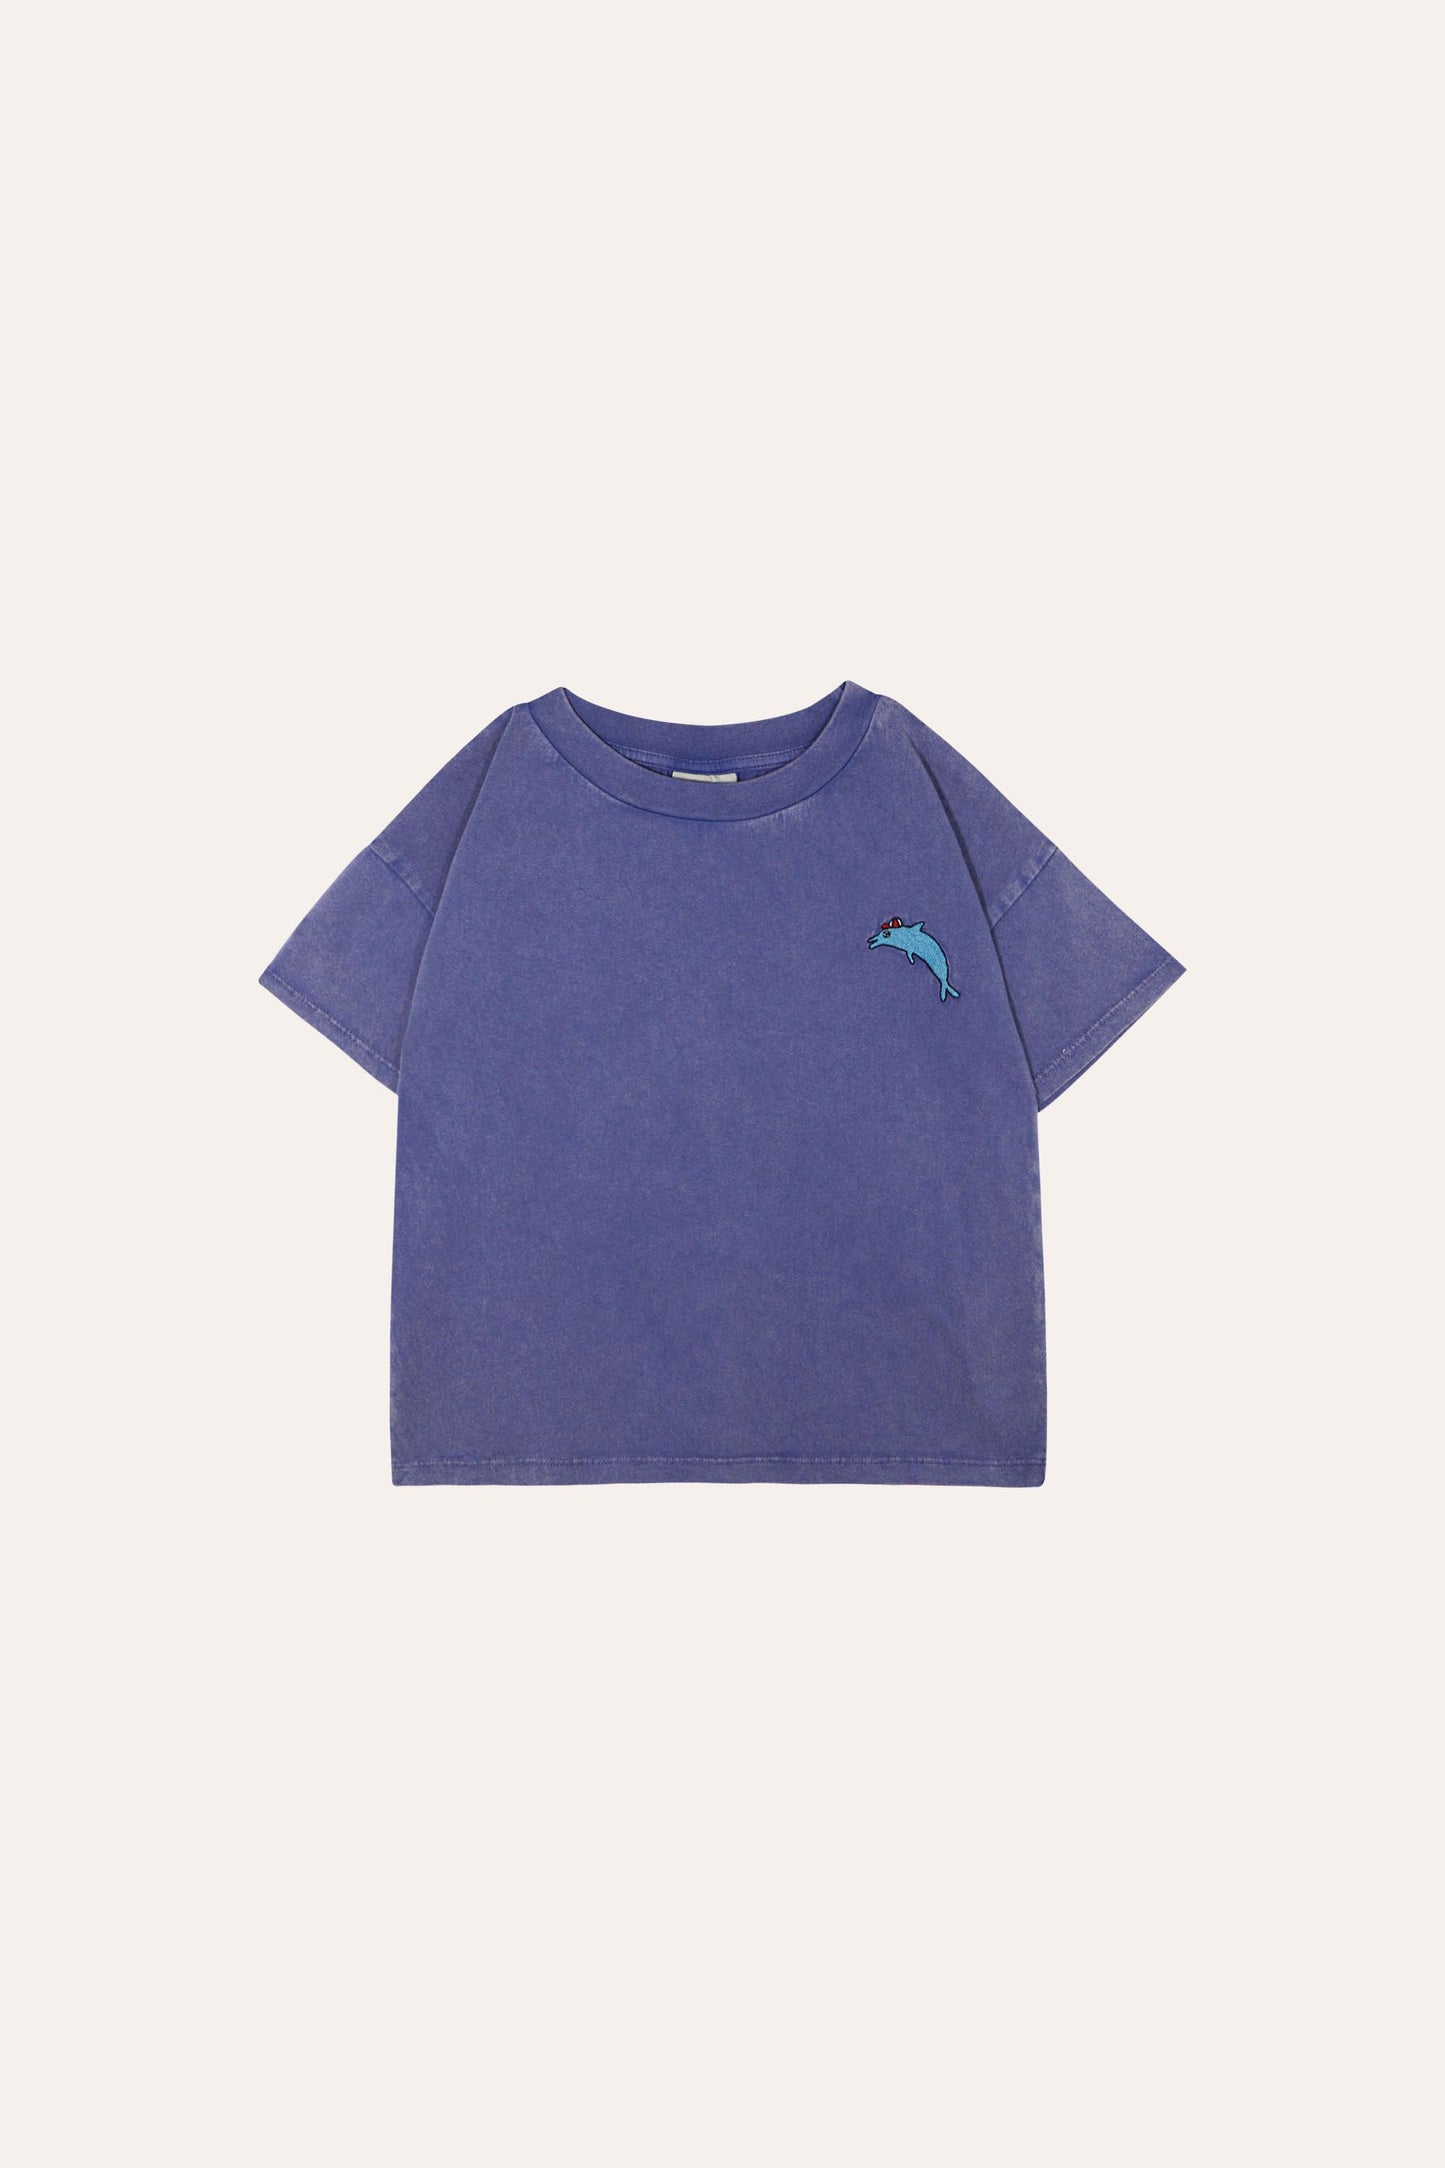 Dolphin Washed Tshirt - The Campamento